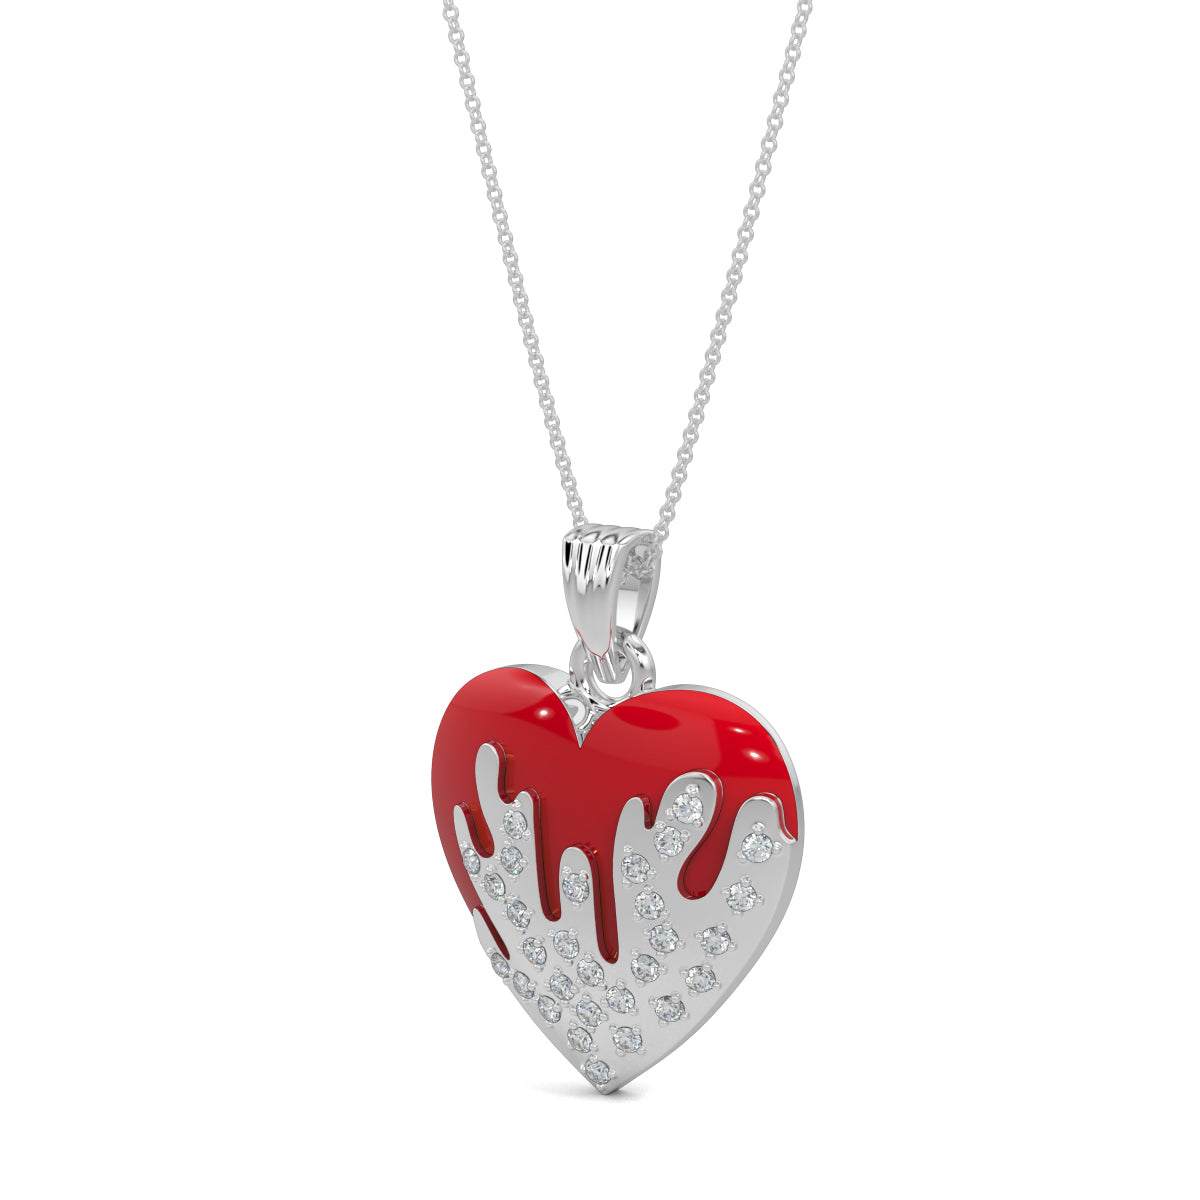 White Gold, Diamond Pendants, natural diamond pendant, lab-grown diamond pendant, Eternal Flame Flicker Pendant from Forever Yours Collection, Heart-shaped Pendant, Casual Diamond Pendant, Red Enamel, Everyday Jewelry, Flame-inspired Design